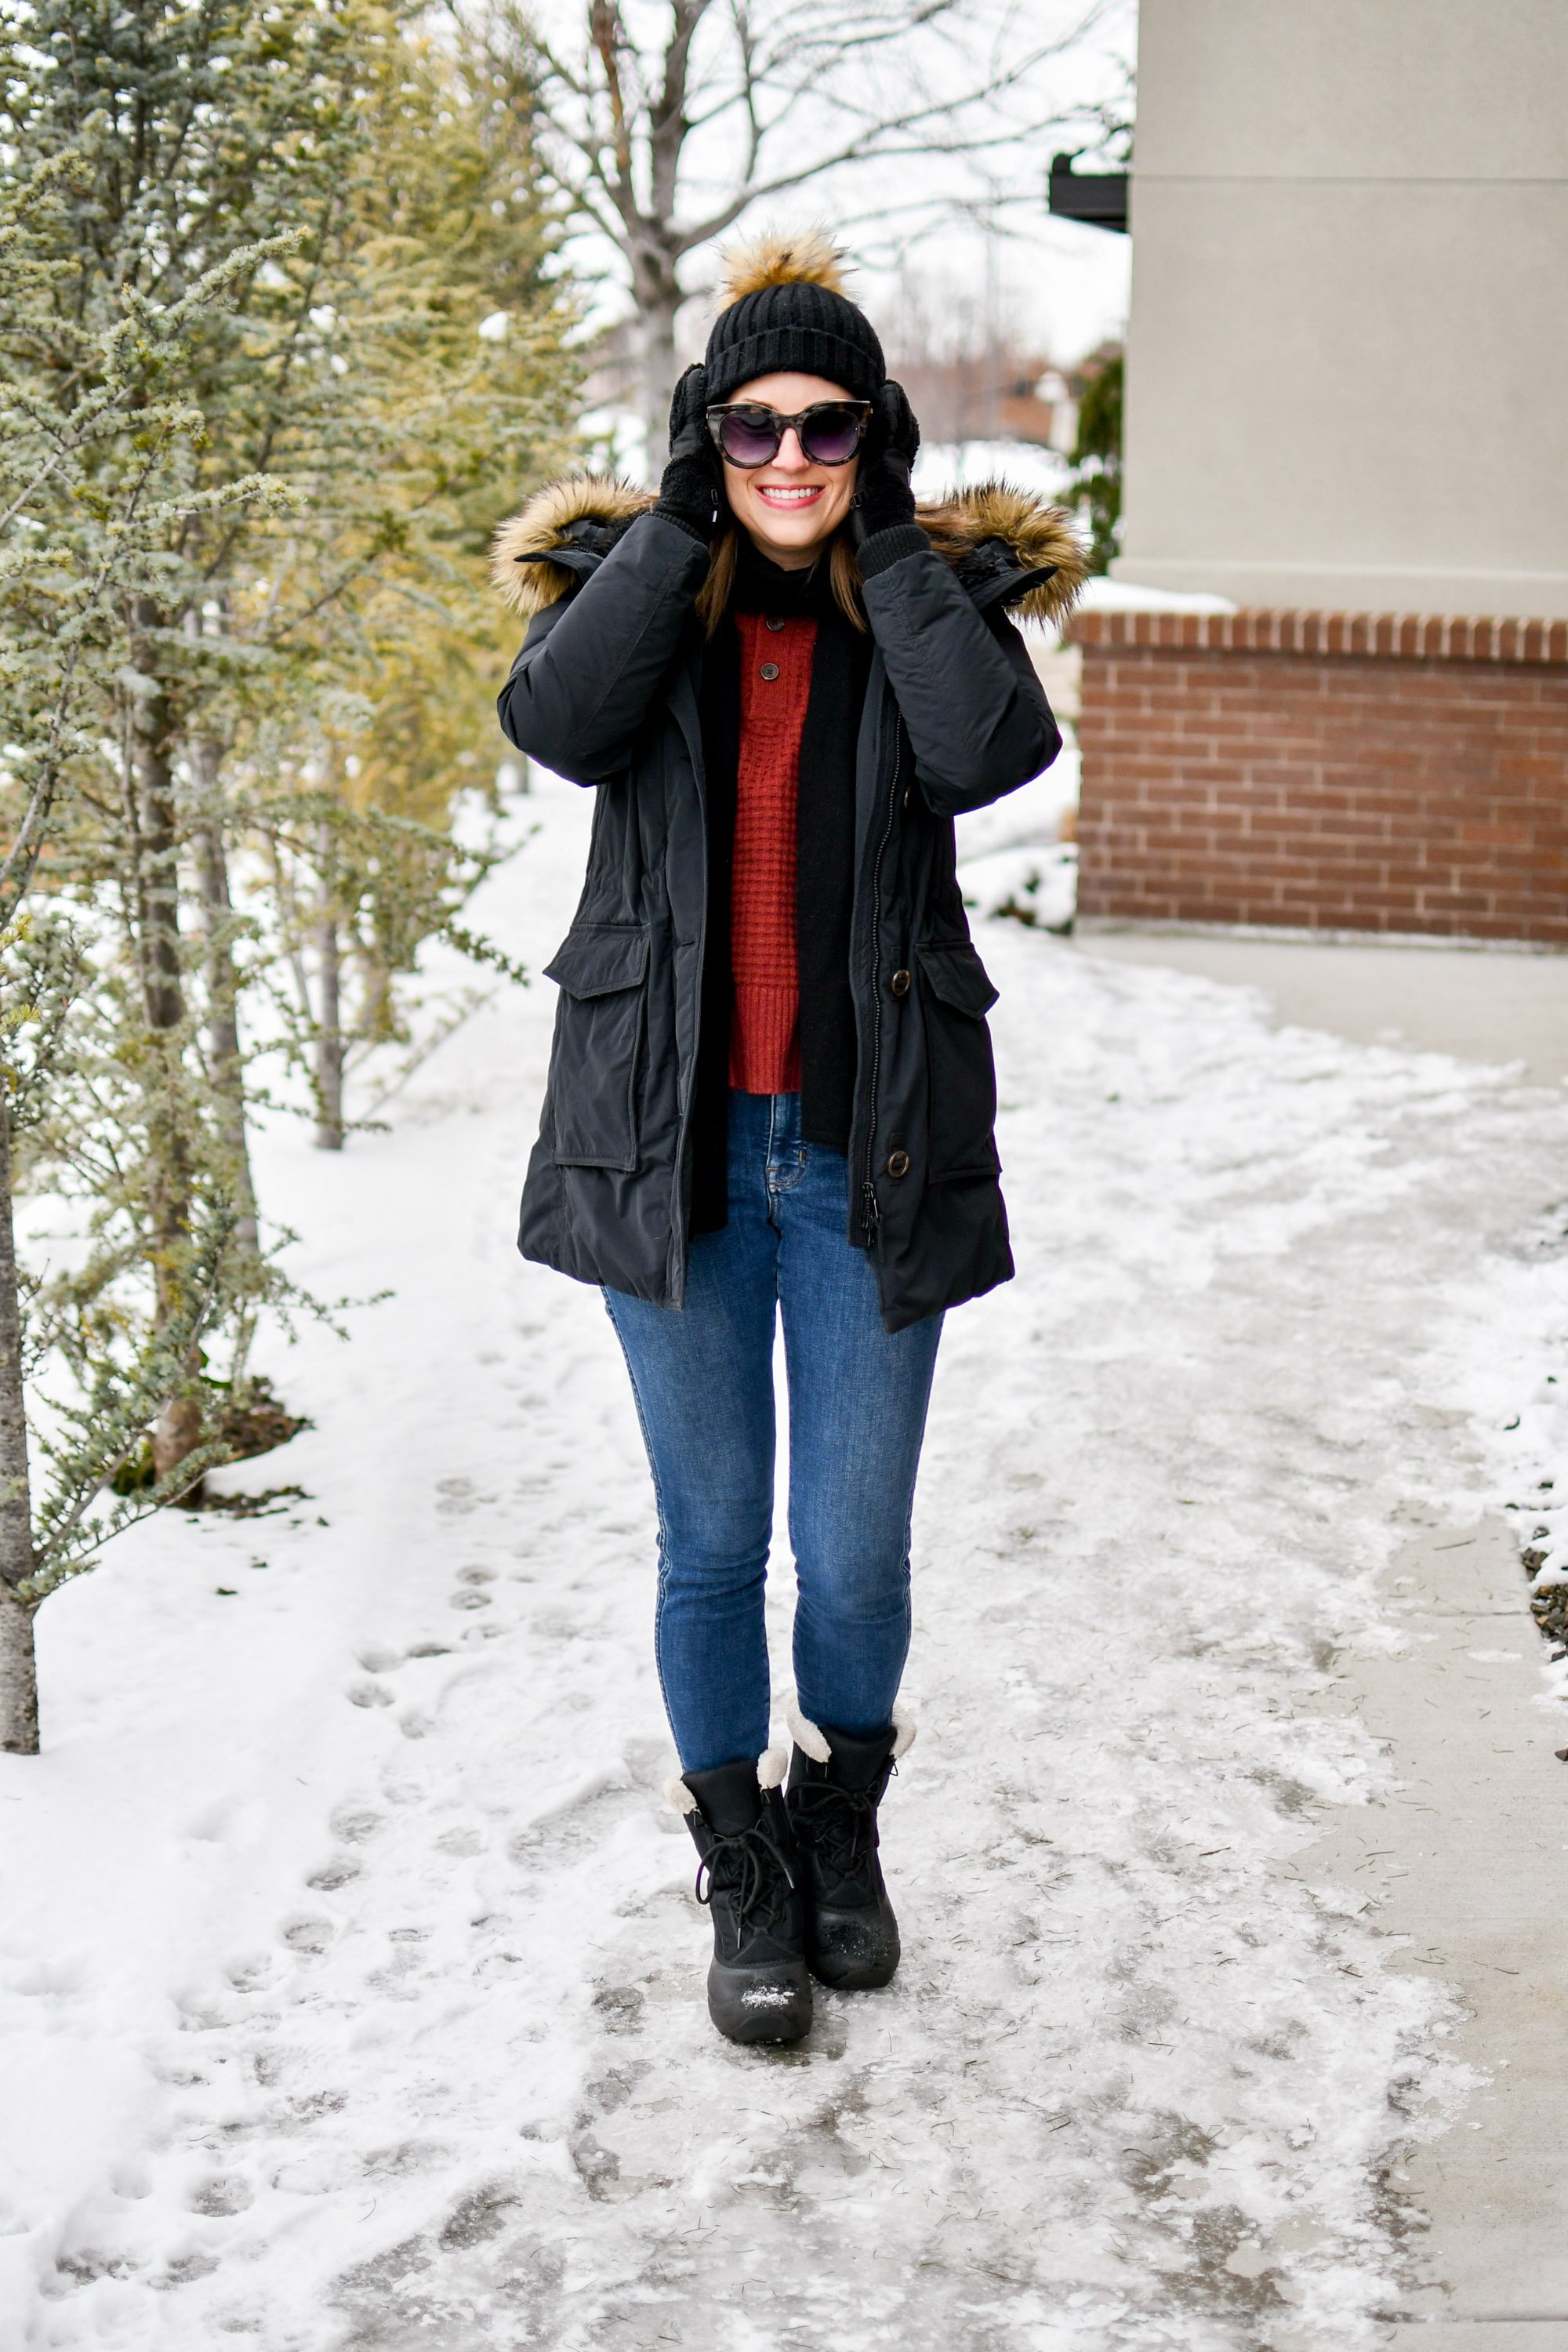 What to wear for winter in Idaho (according to a local)